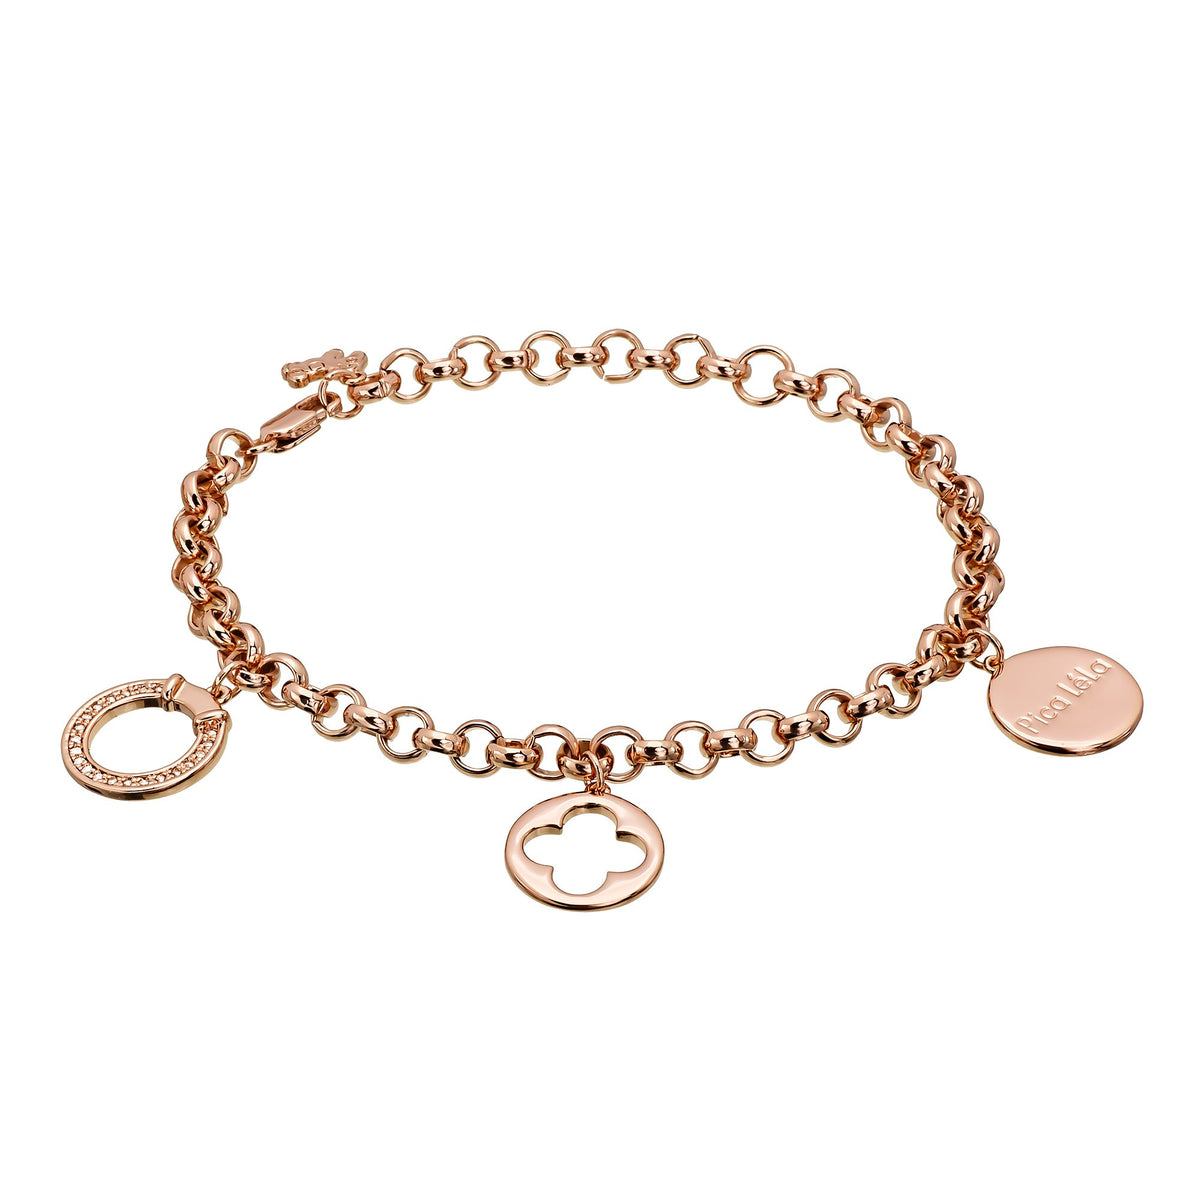 Luck and Wishes Braclet - 18K Rose Gold Plated - Crystals | Pica LeLa ...